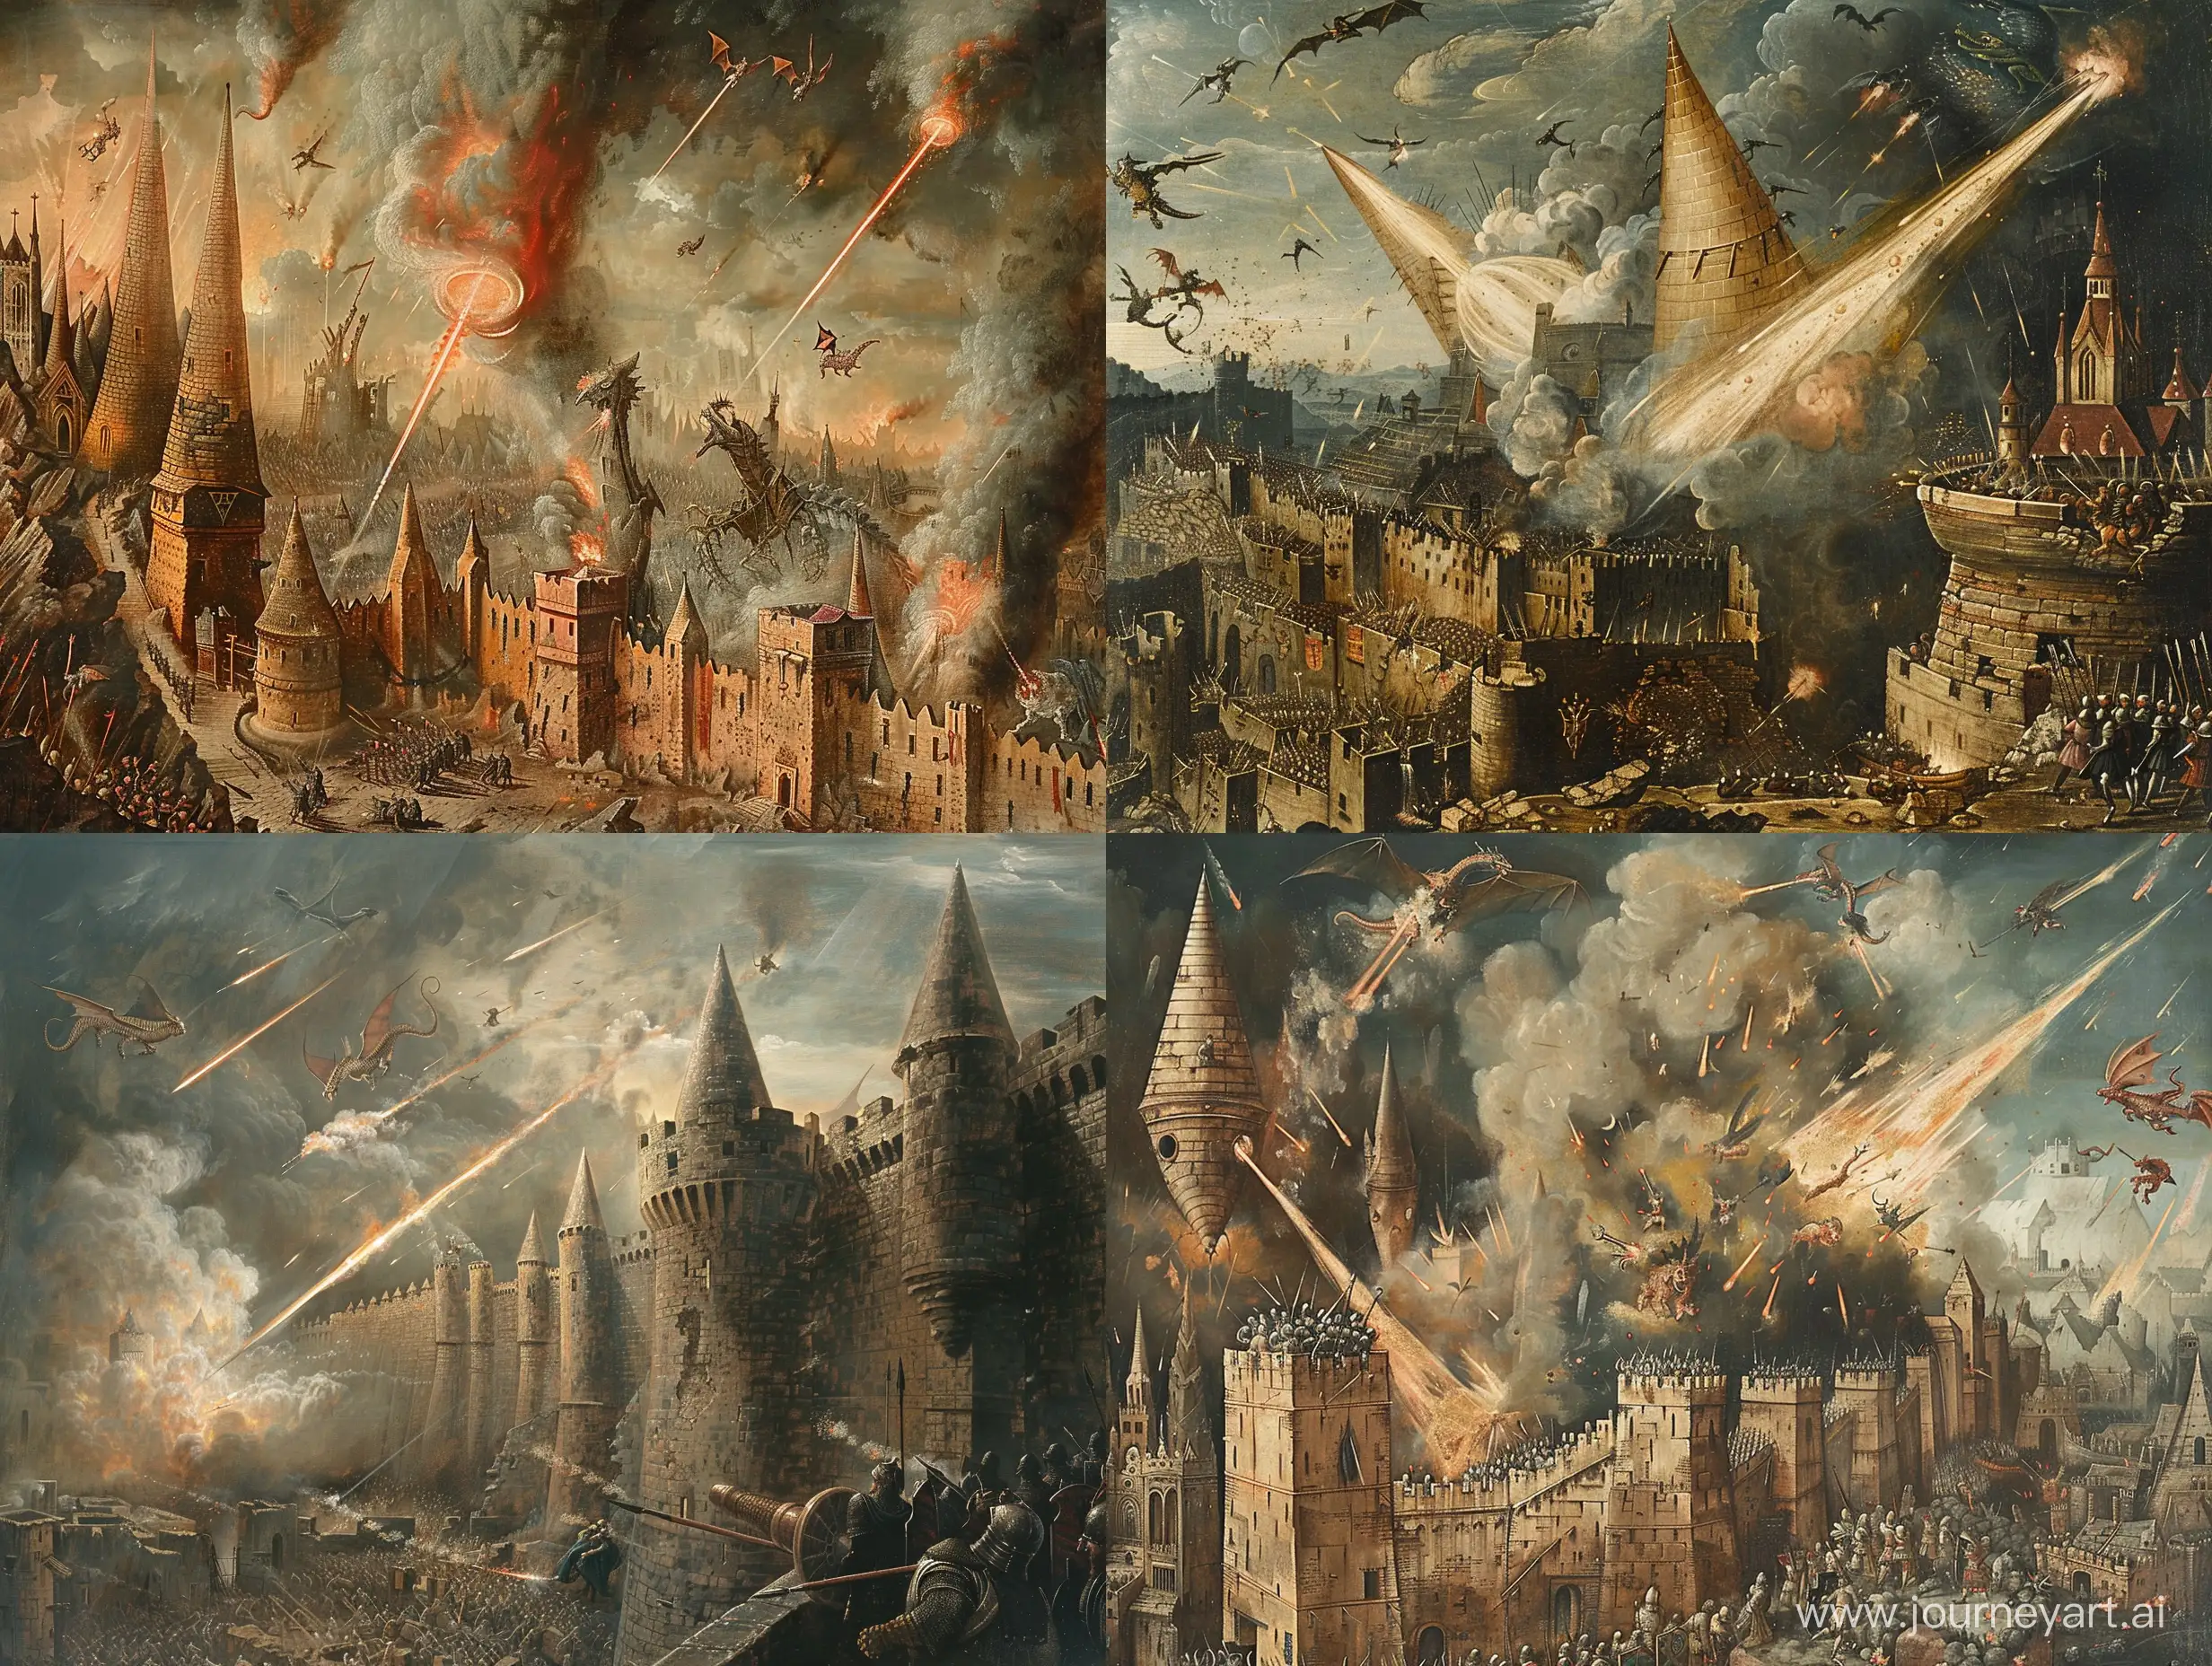 Painting, city walls being assaulted by a medieval army, coned shaped cannon shooting giant bullet like rays of light towards city walls , smoke, destruction, small flying dragons far in the air, knights in armour fighting in the distance , heavy detail, masterpiece, 